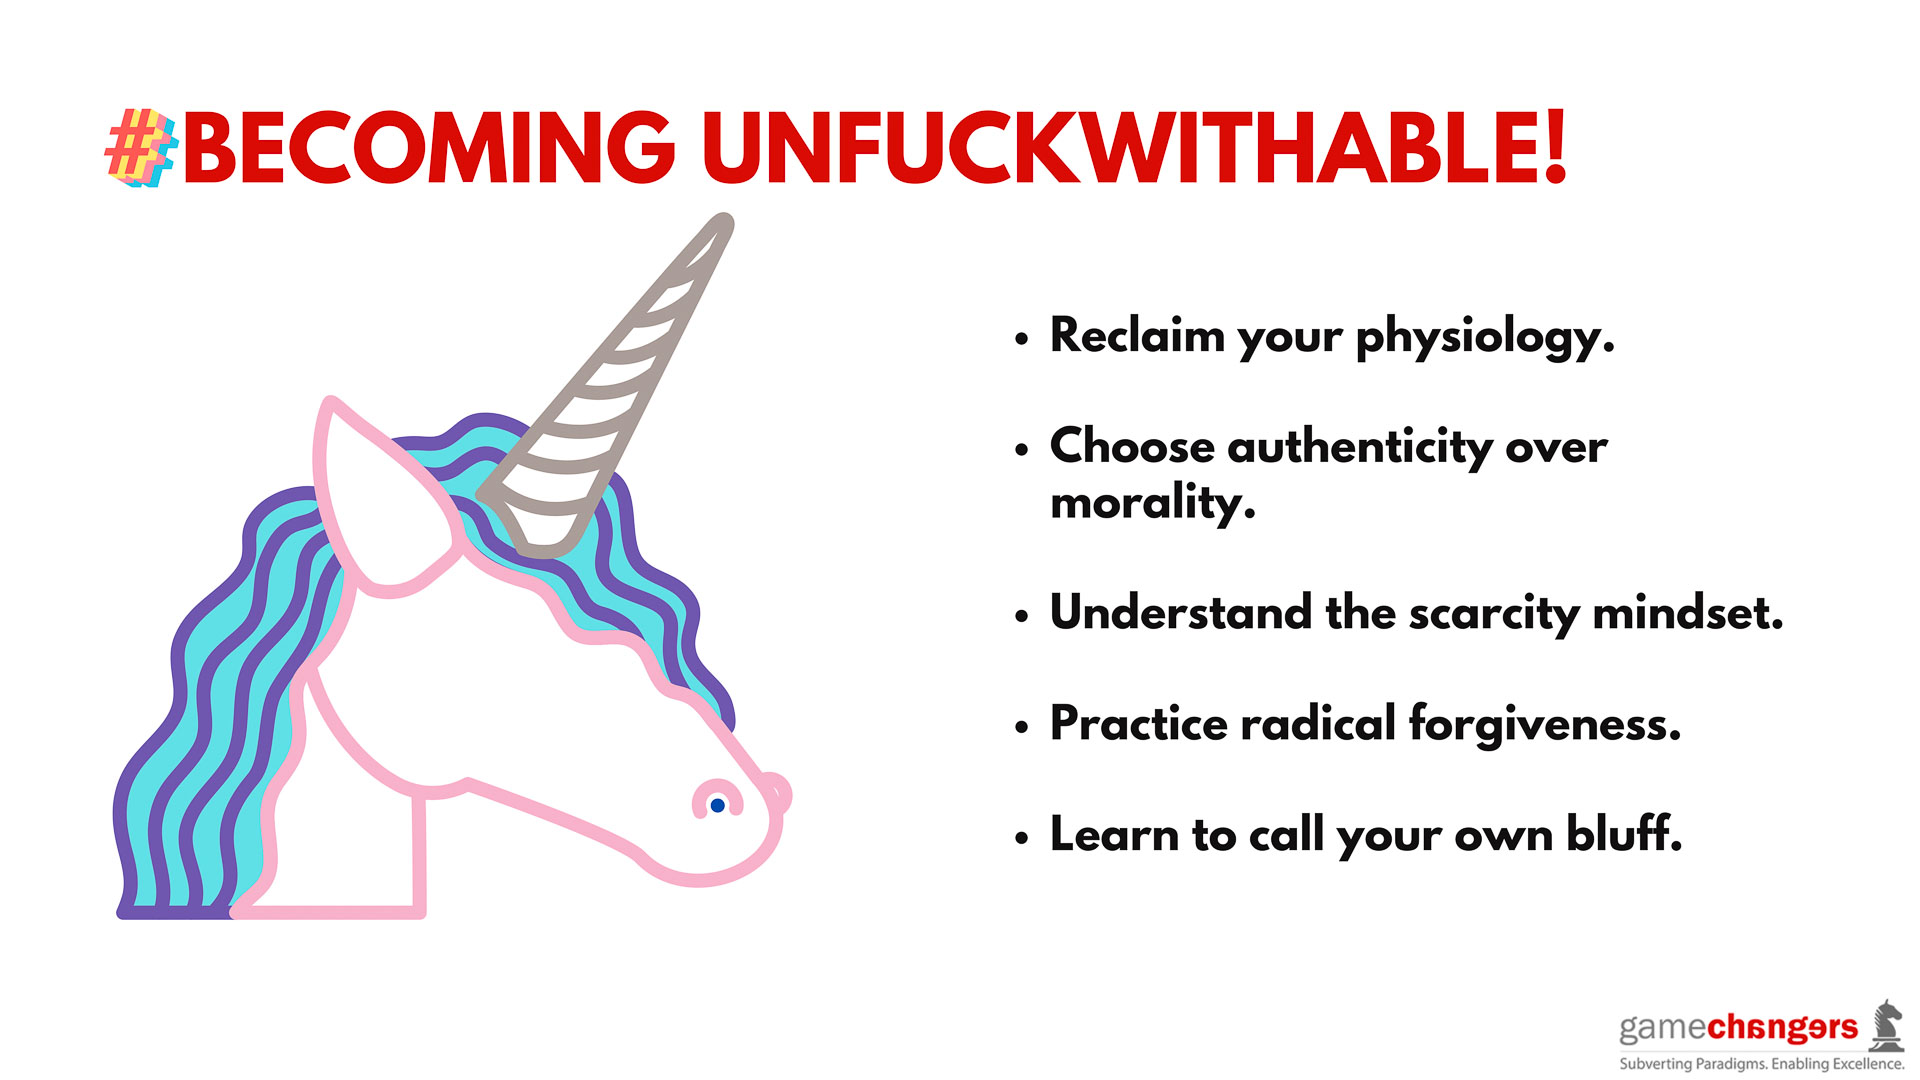 “eil-becoming-unfuckwithable-9”